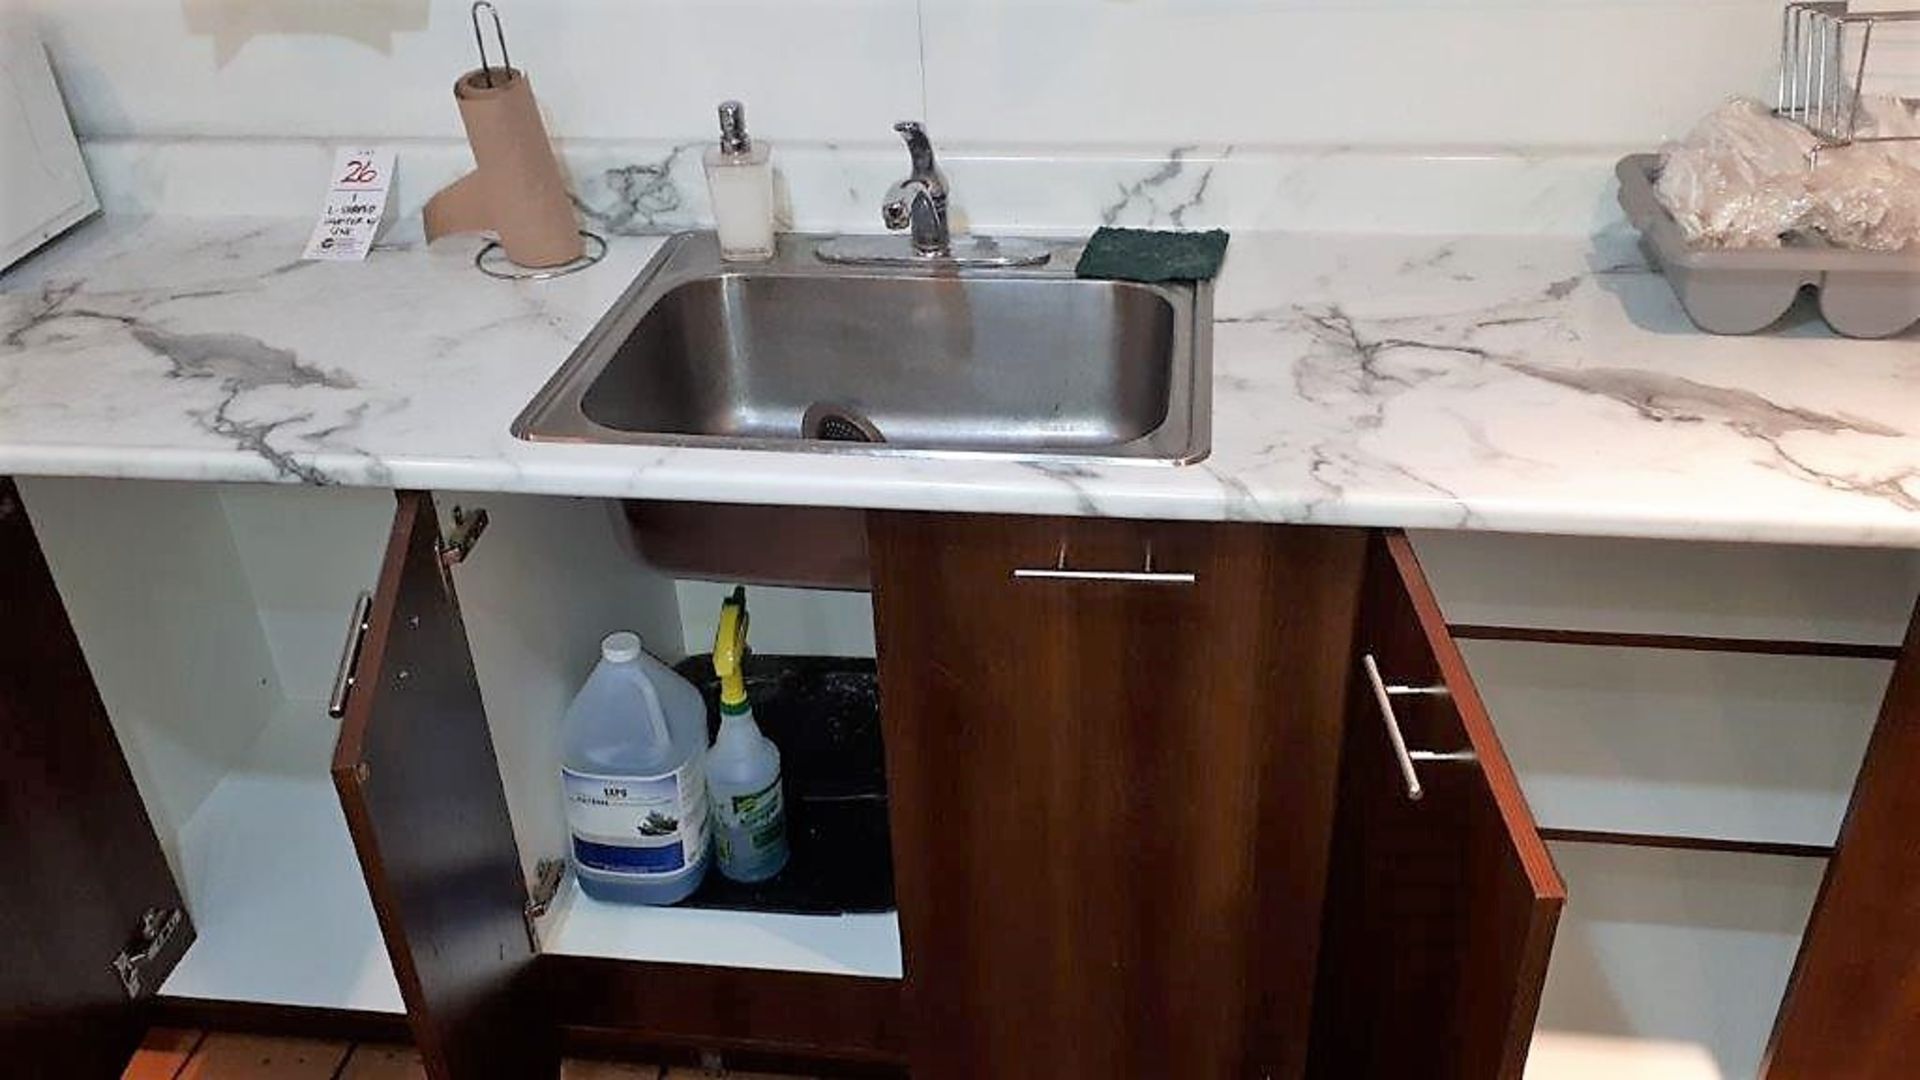 L-Shaped counter w/sink - Image 2 of 3